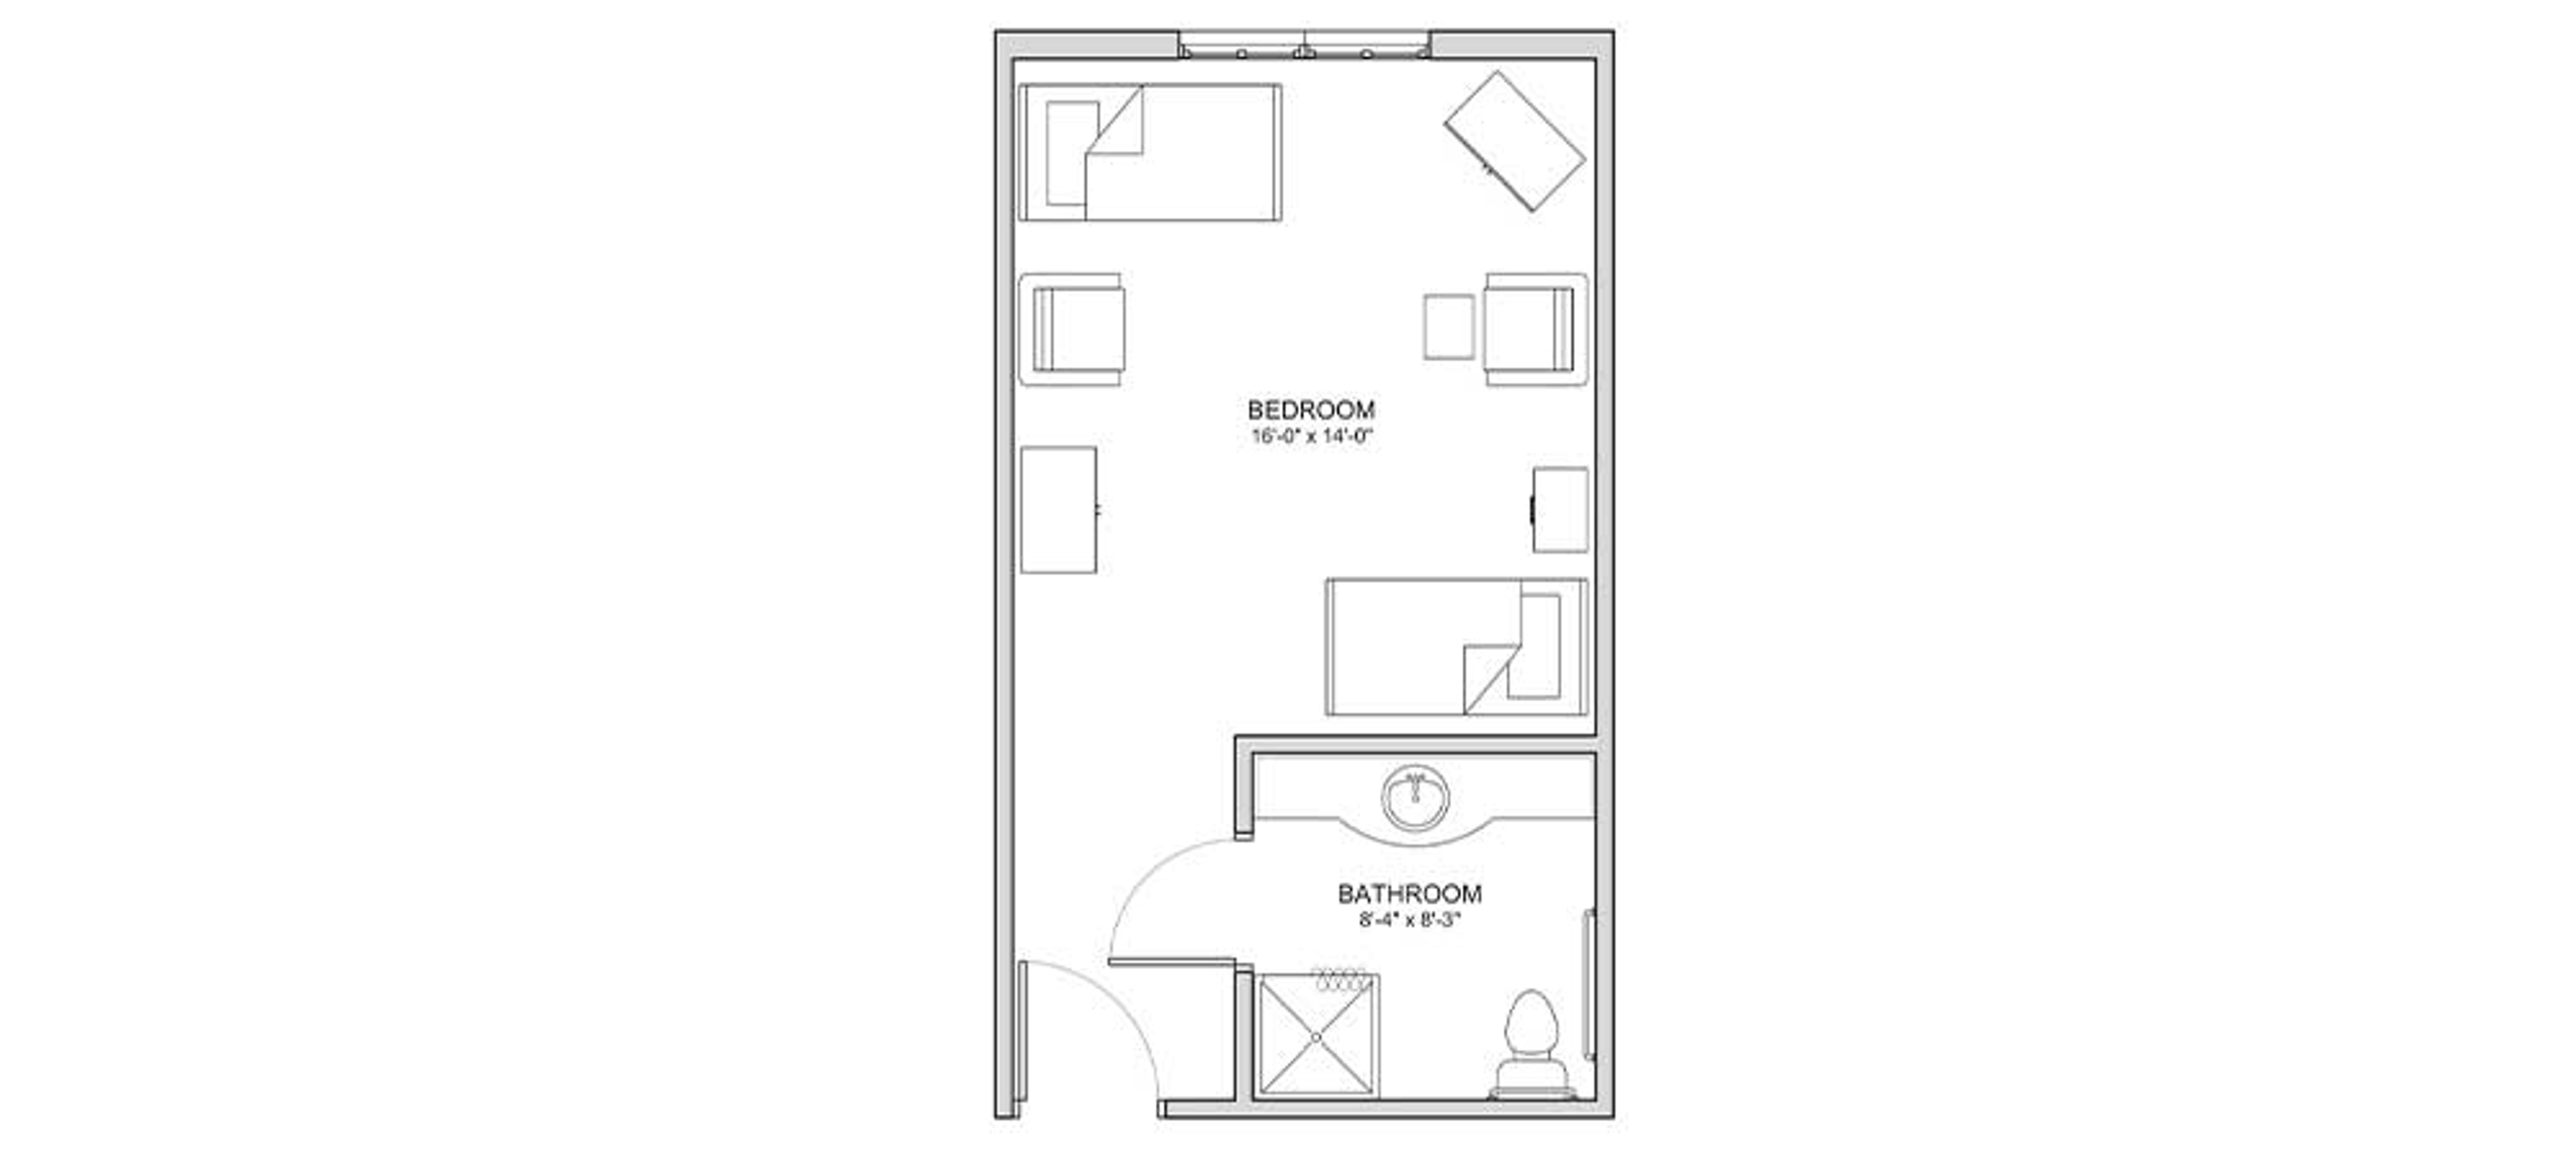 Floorplan - The Auberge at Kingwood - 1 bed, 1 bath, Private Memory Care